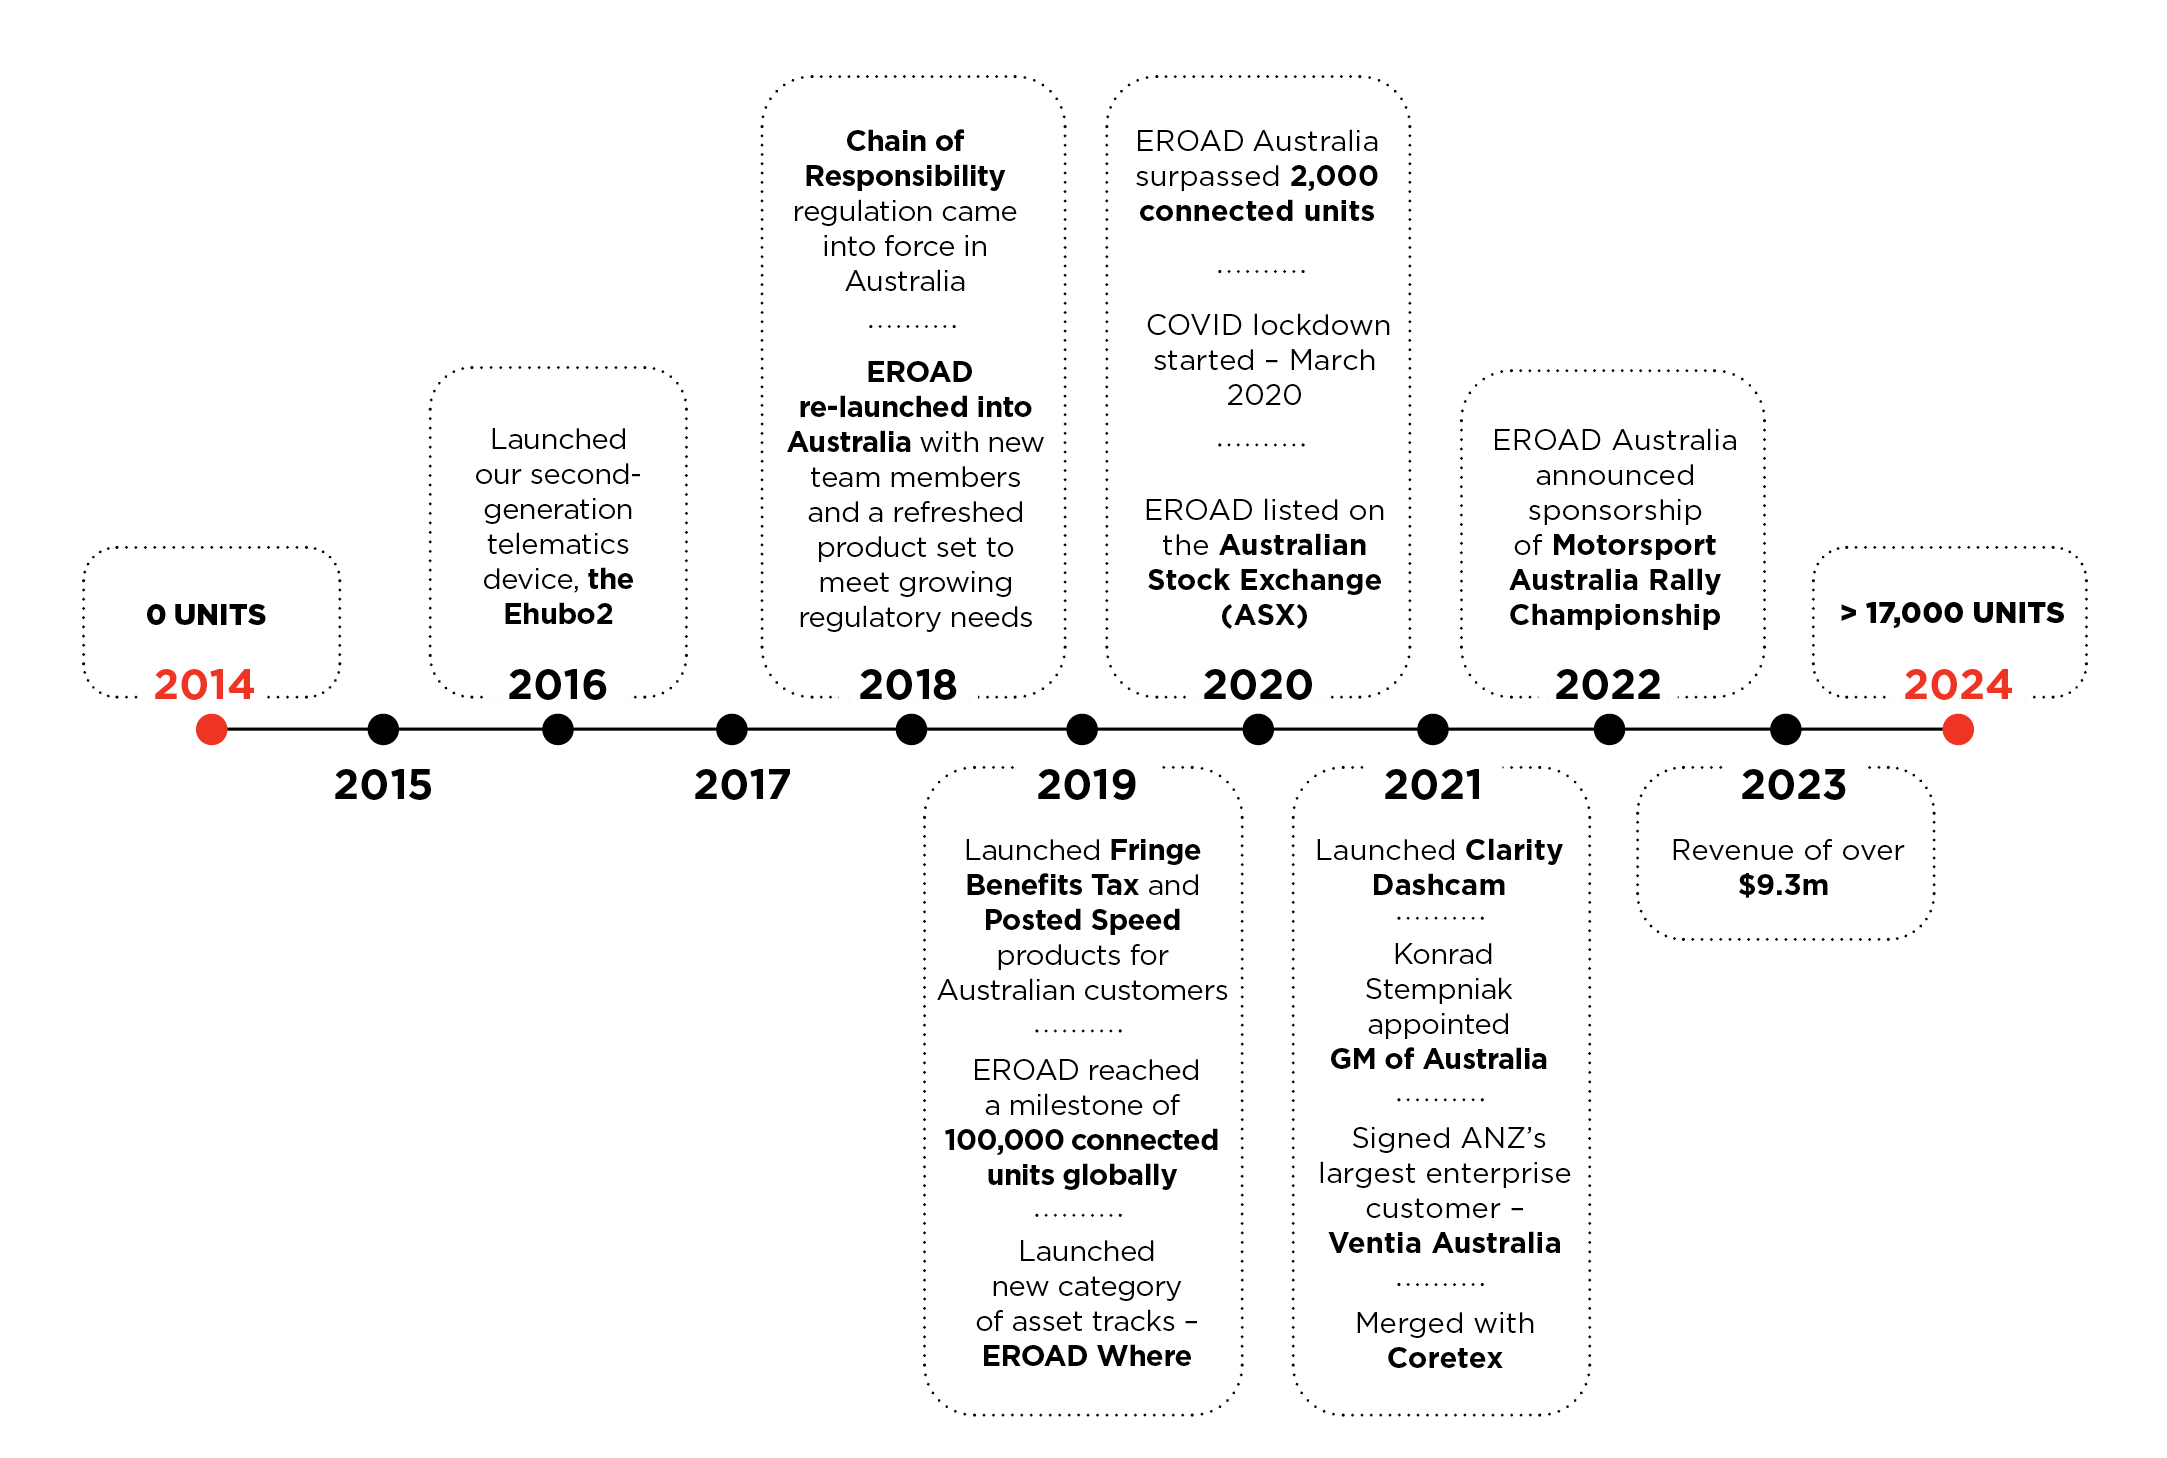 image shows a timeline of the key milestones in the last ten years in australia for EROAD